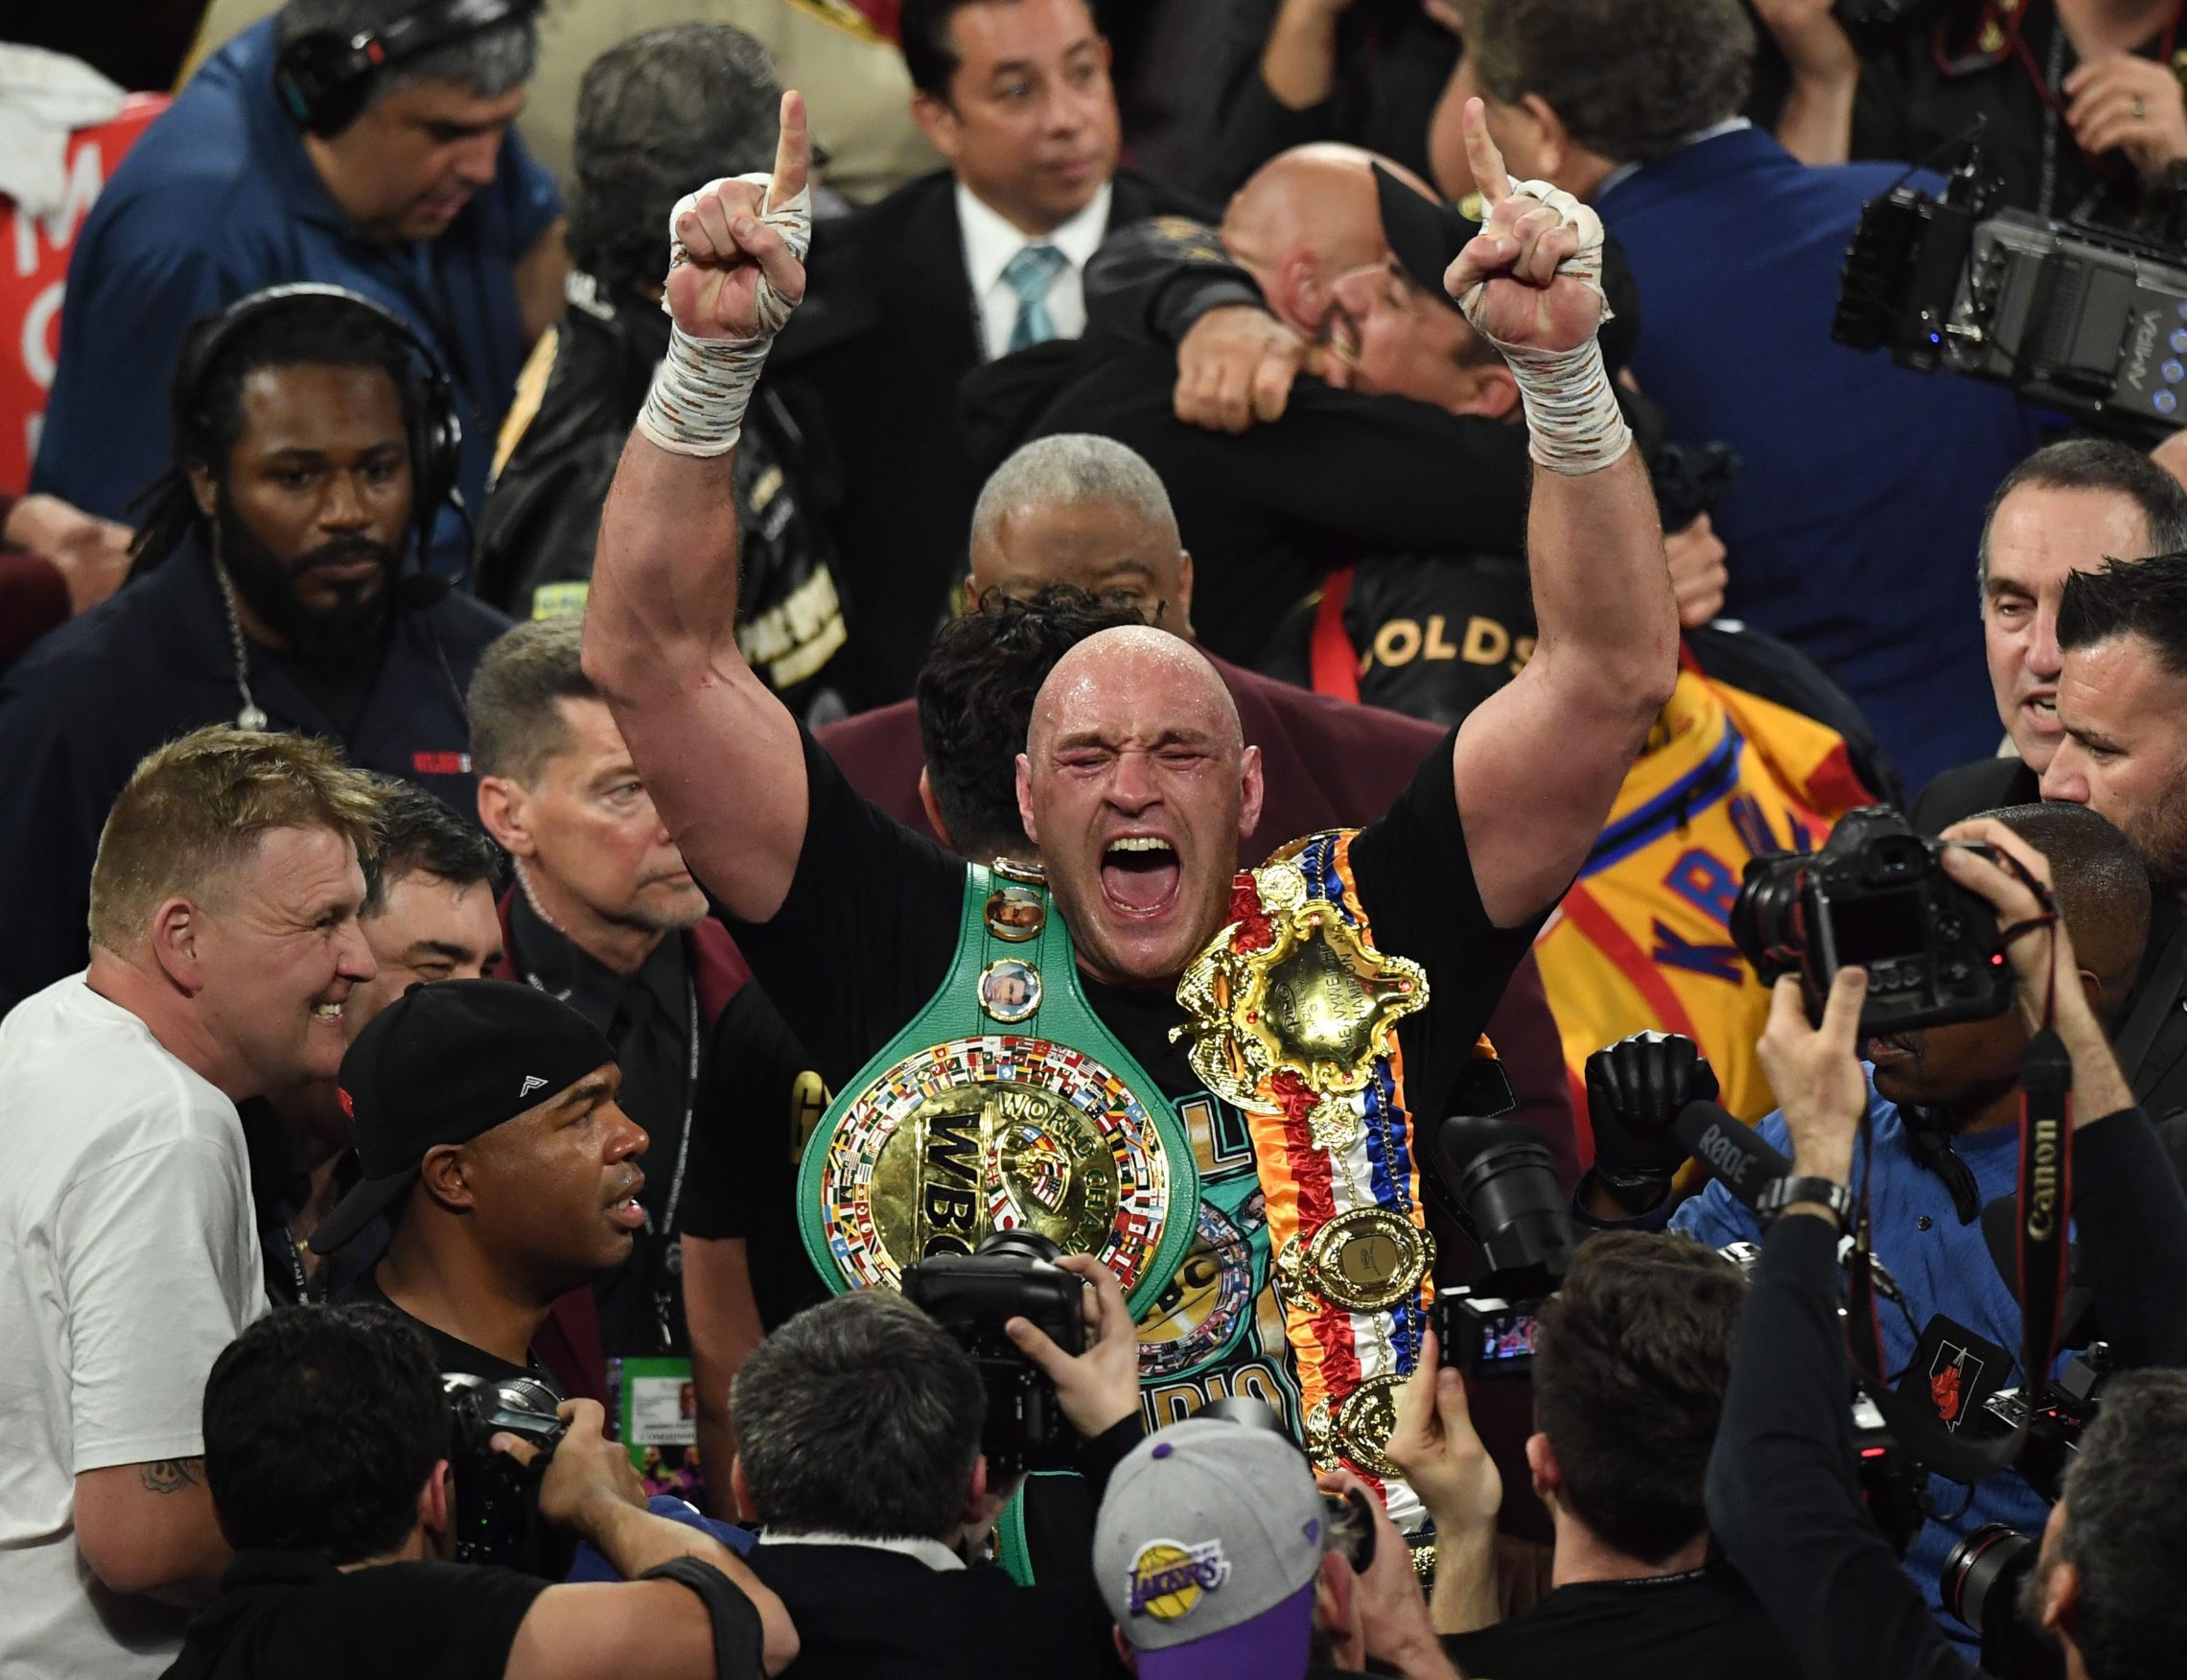 British boxer Tyson Fury celebrates after defeating US boxer Deontay Wilder in the seventh round during their World Boxing Council (WBC) Heavyweight Championship Title boxing match at the MGM Grand Garden Arena in Las Vegas on February 22, 2020. (Photo by Mark RALSTON / AFP)